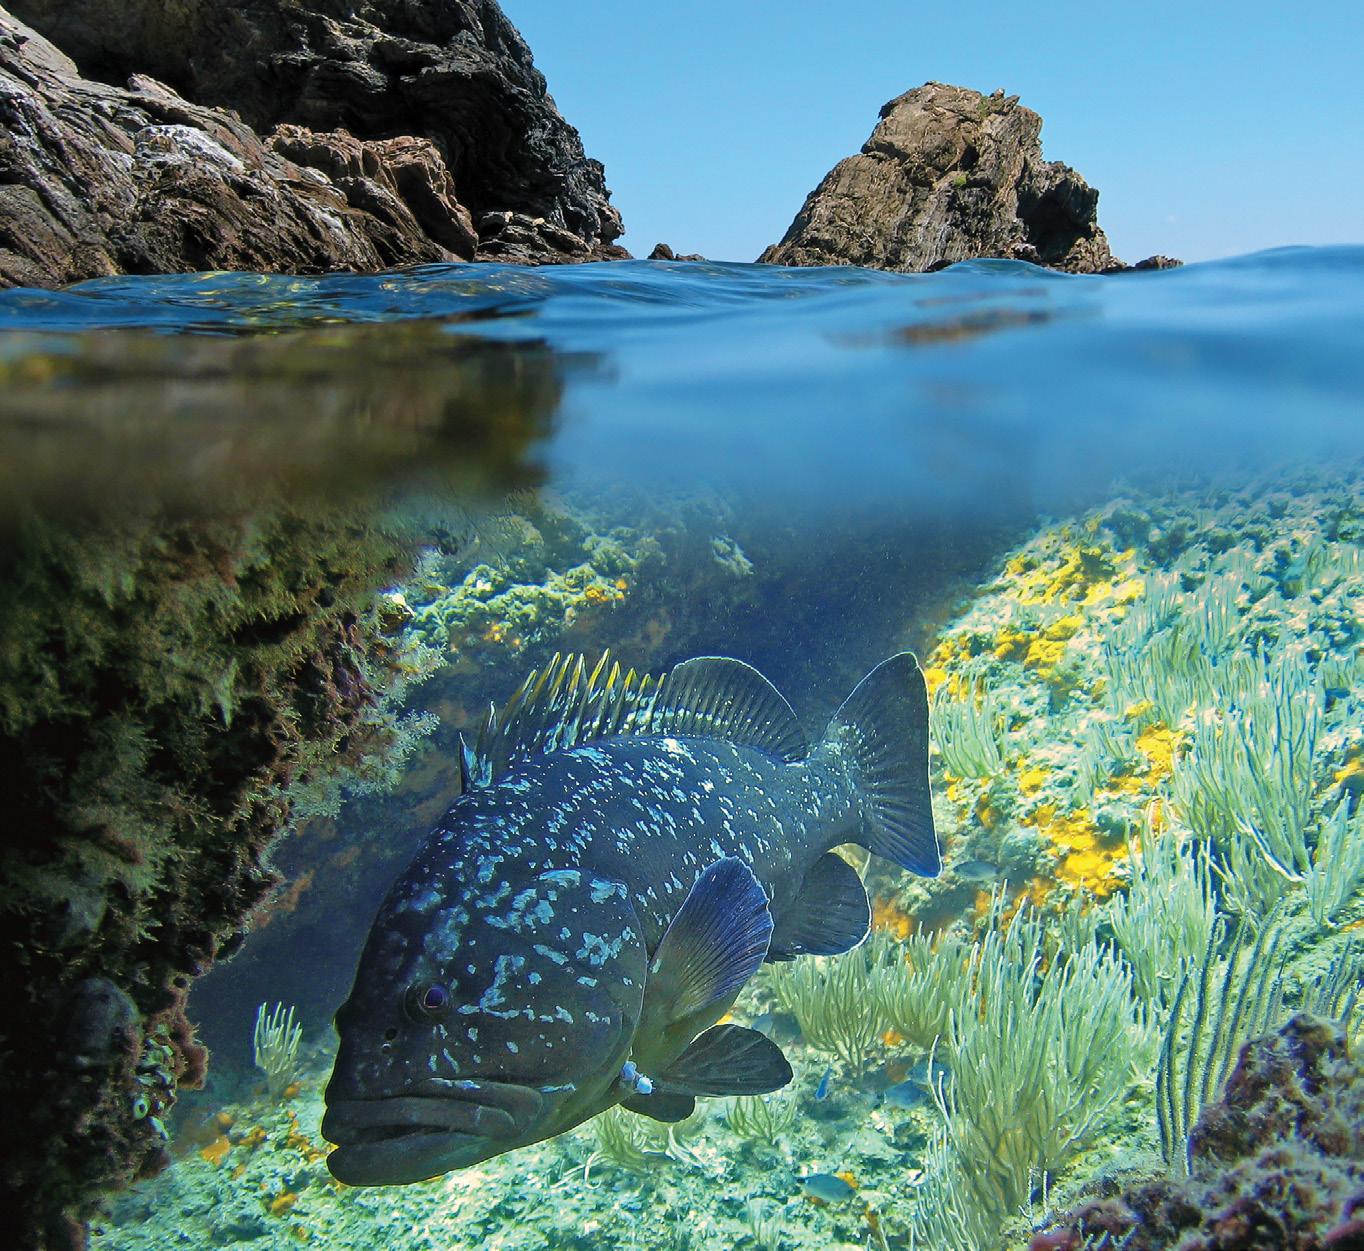 Spain’s Illes Medes, famous for the cave-dwelling giant grouper